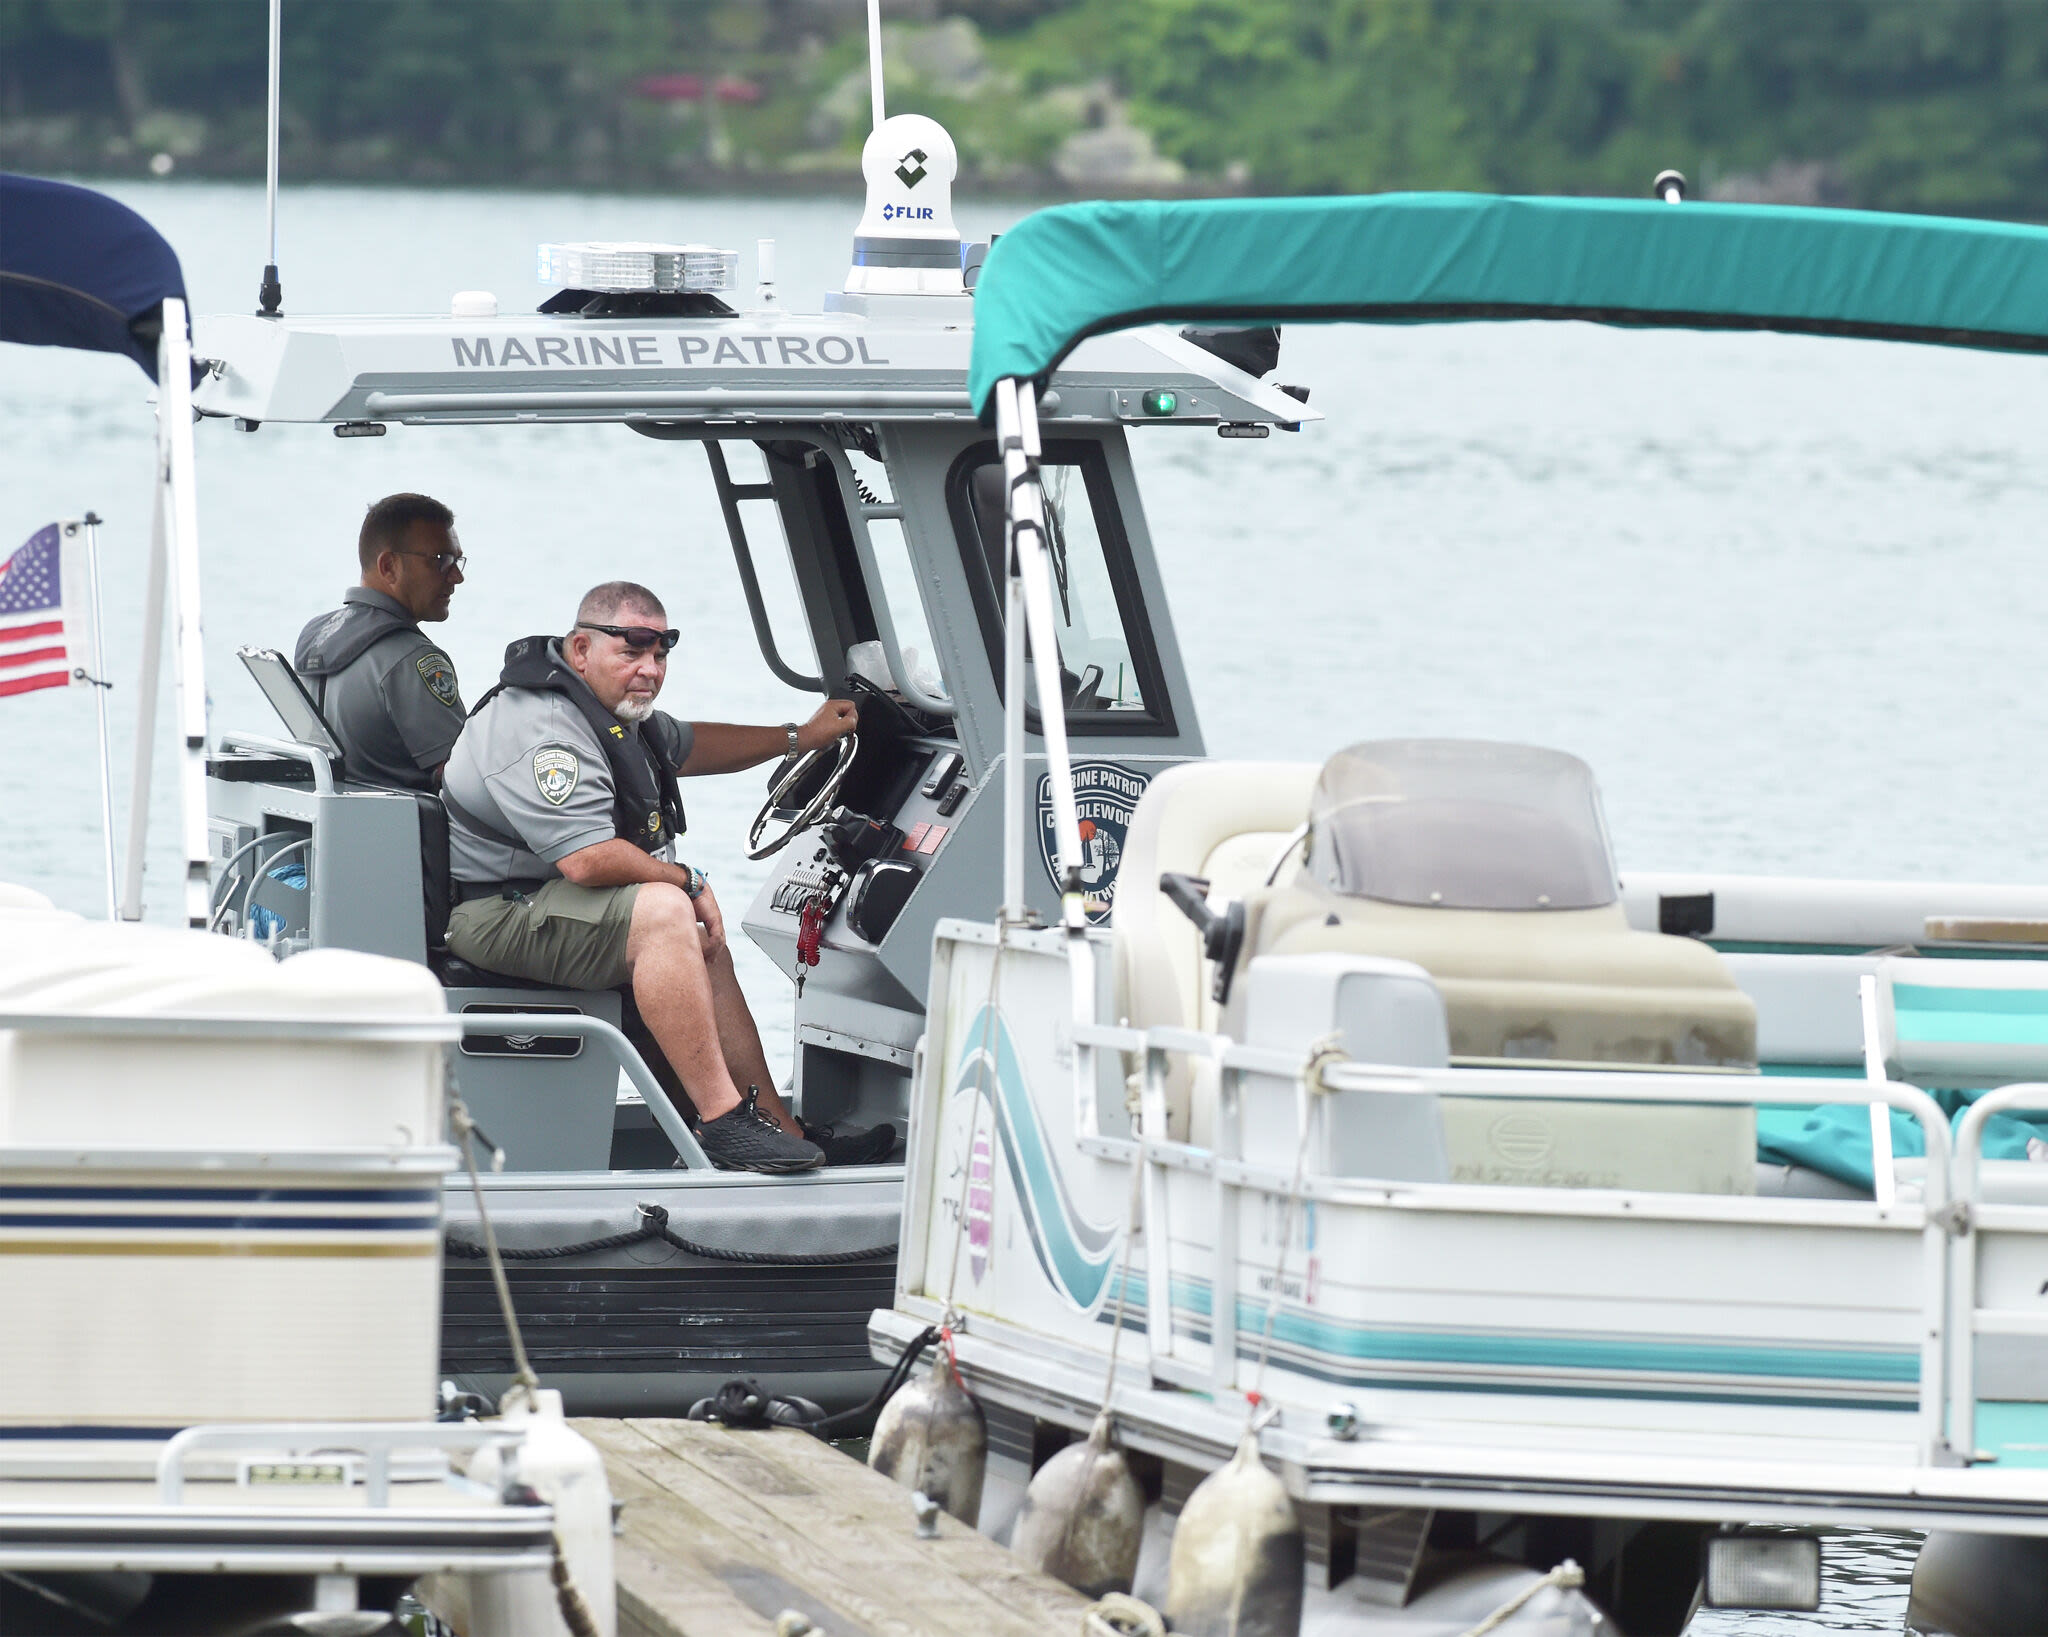 Bodies of missing swimmers recovered from Candlewood Lake in Danbury, officials say